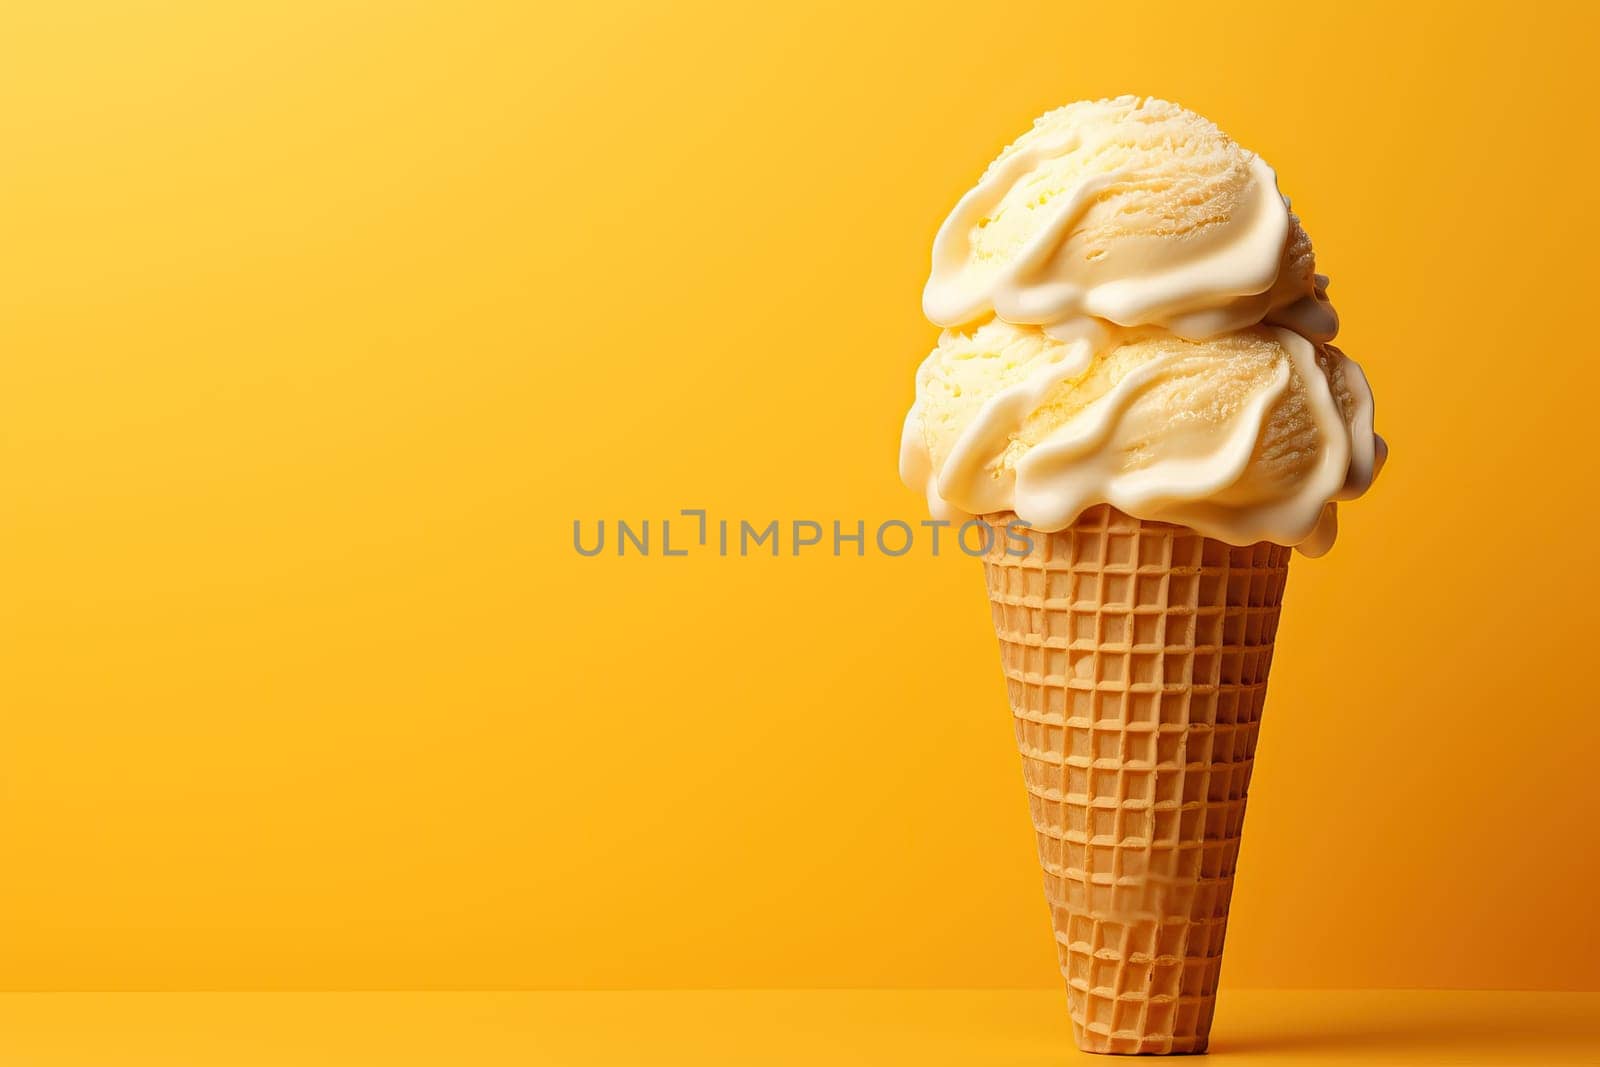 Vanilla ice cream in a waffle cup, a large serving of ice cream on a yellow background.